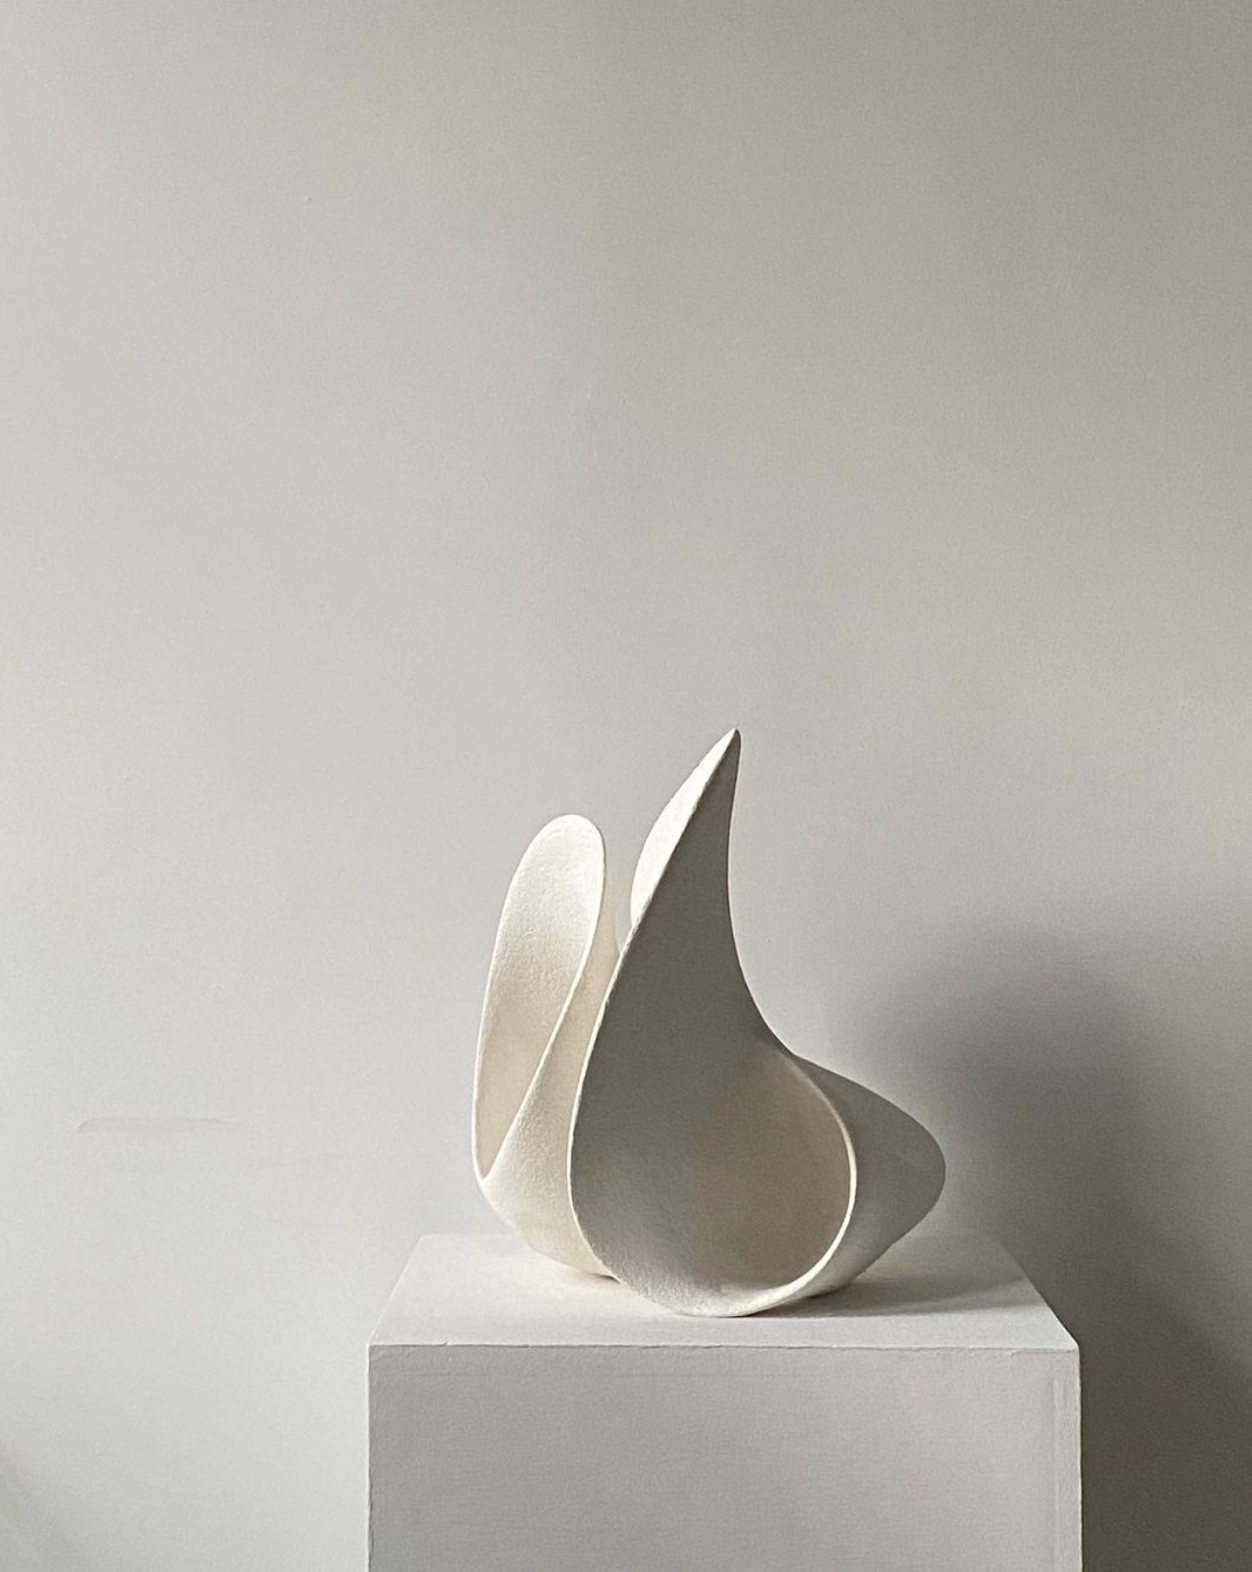 Clay sculpture on a white block in front of a white wall